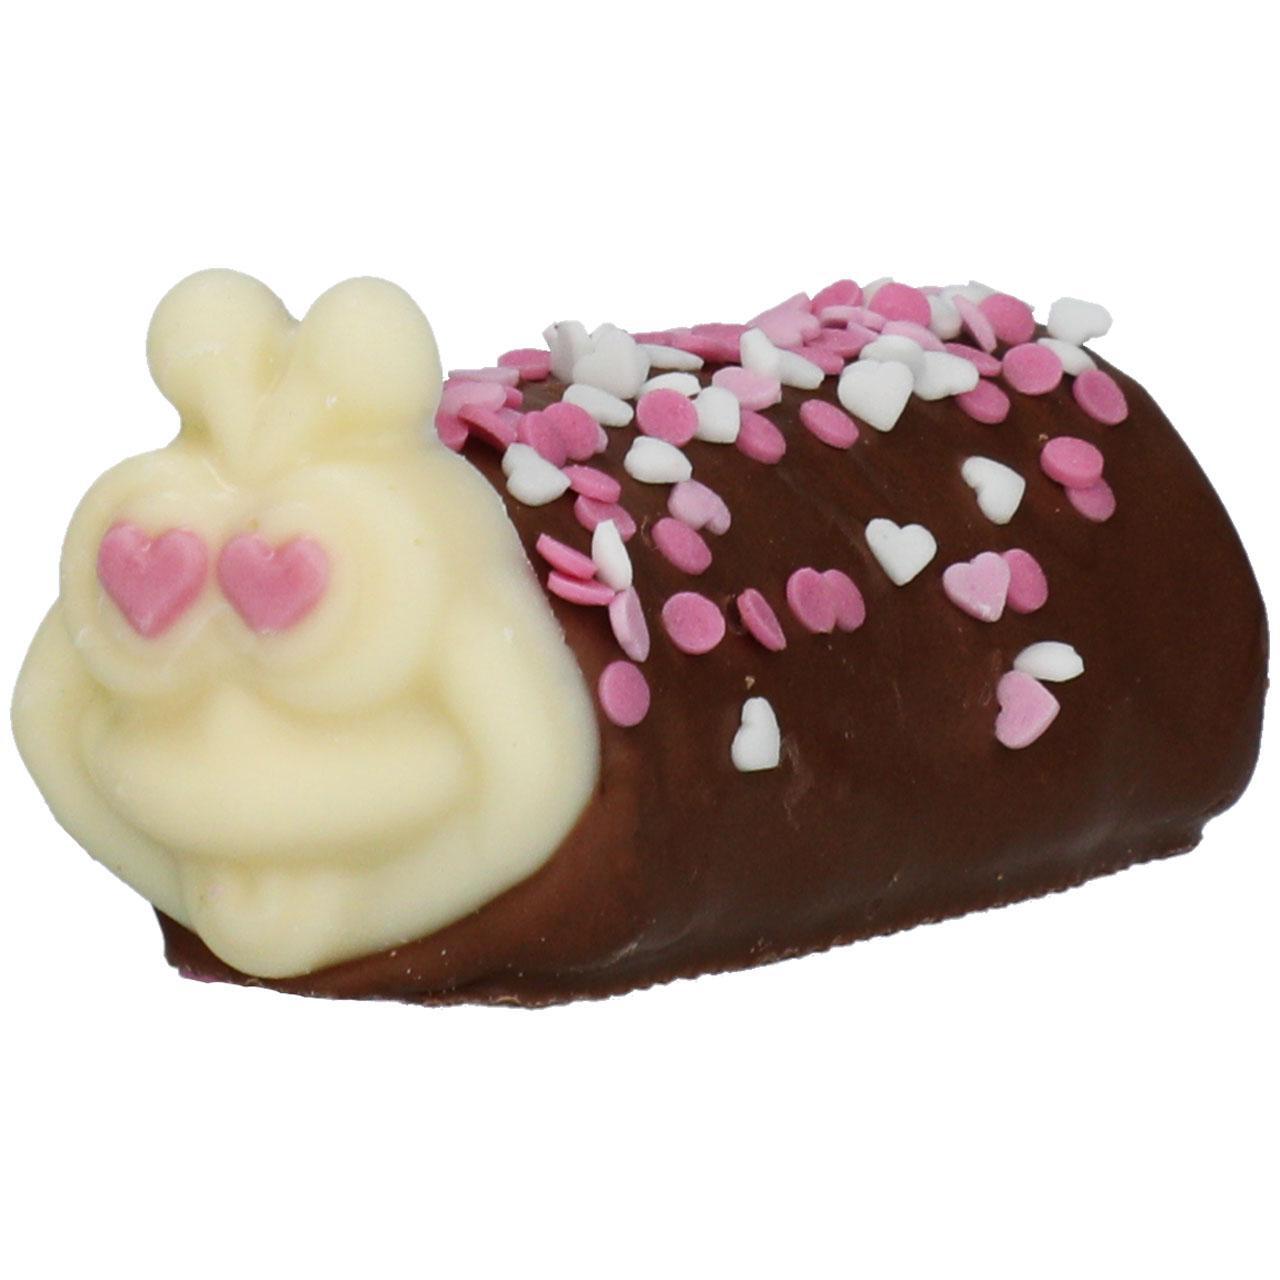 M&S Loved Up Mini Colin the Caterpillar Cakes 170g